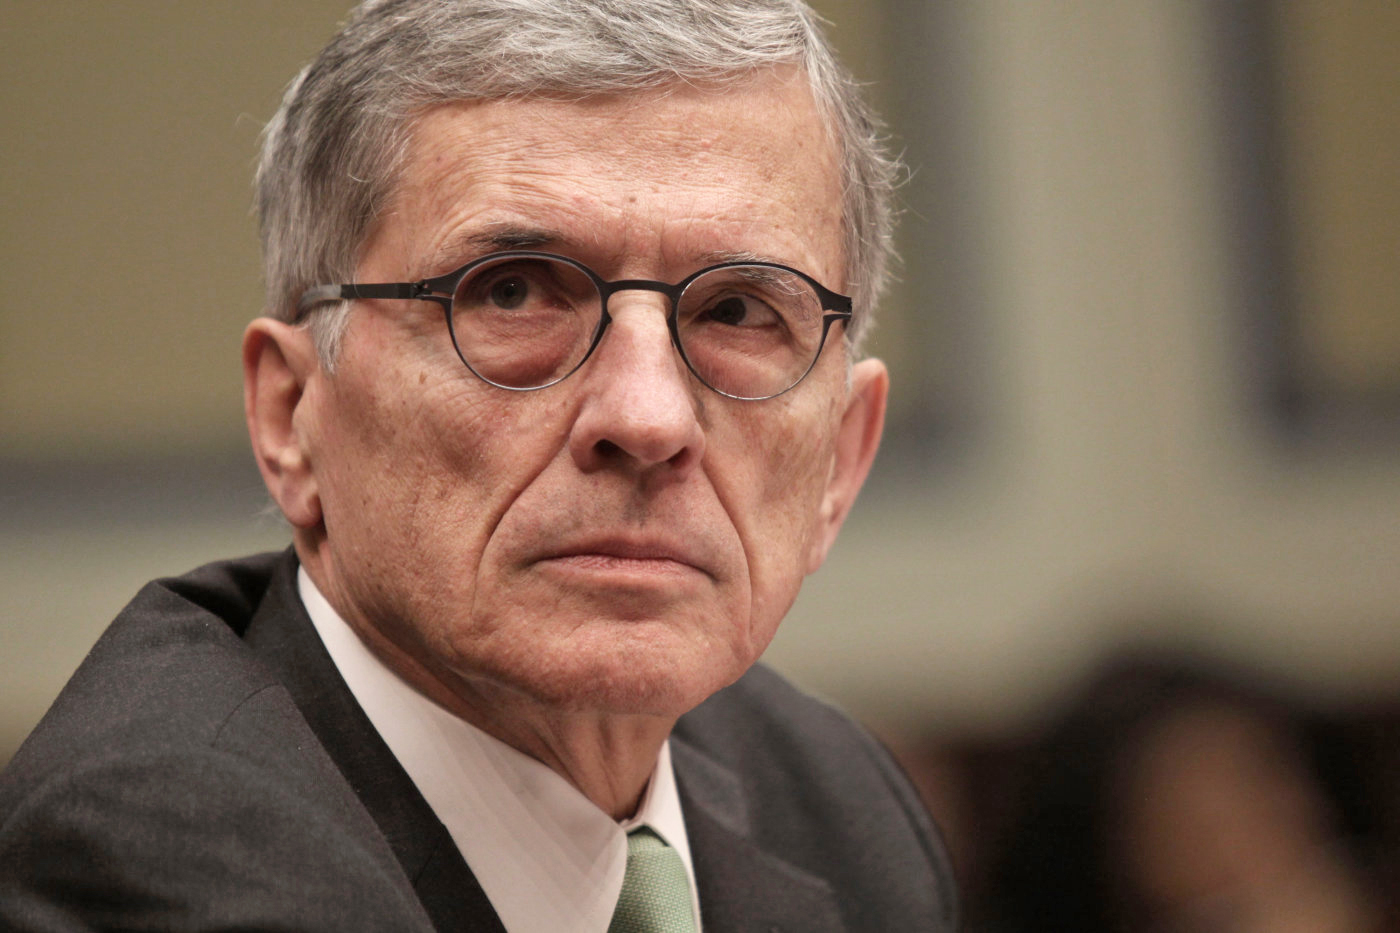 The FCC is going to war over set-top boxes